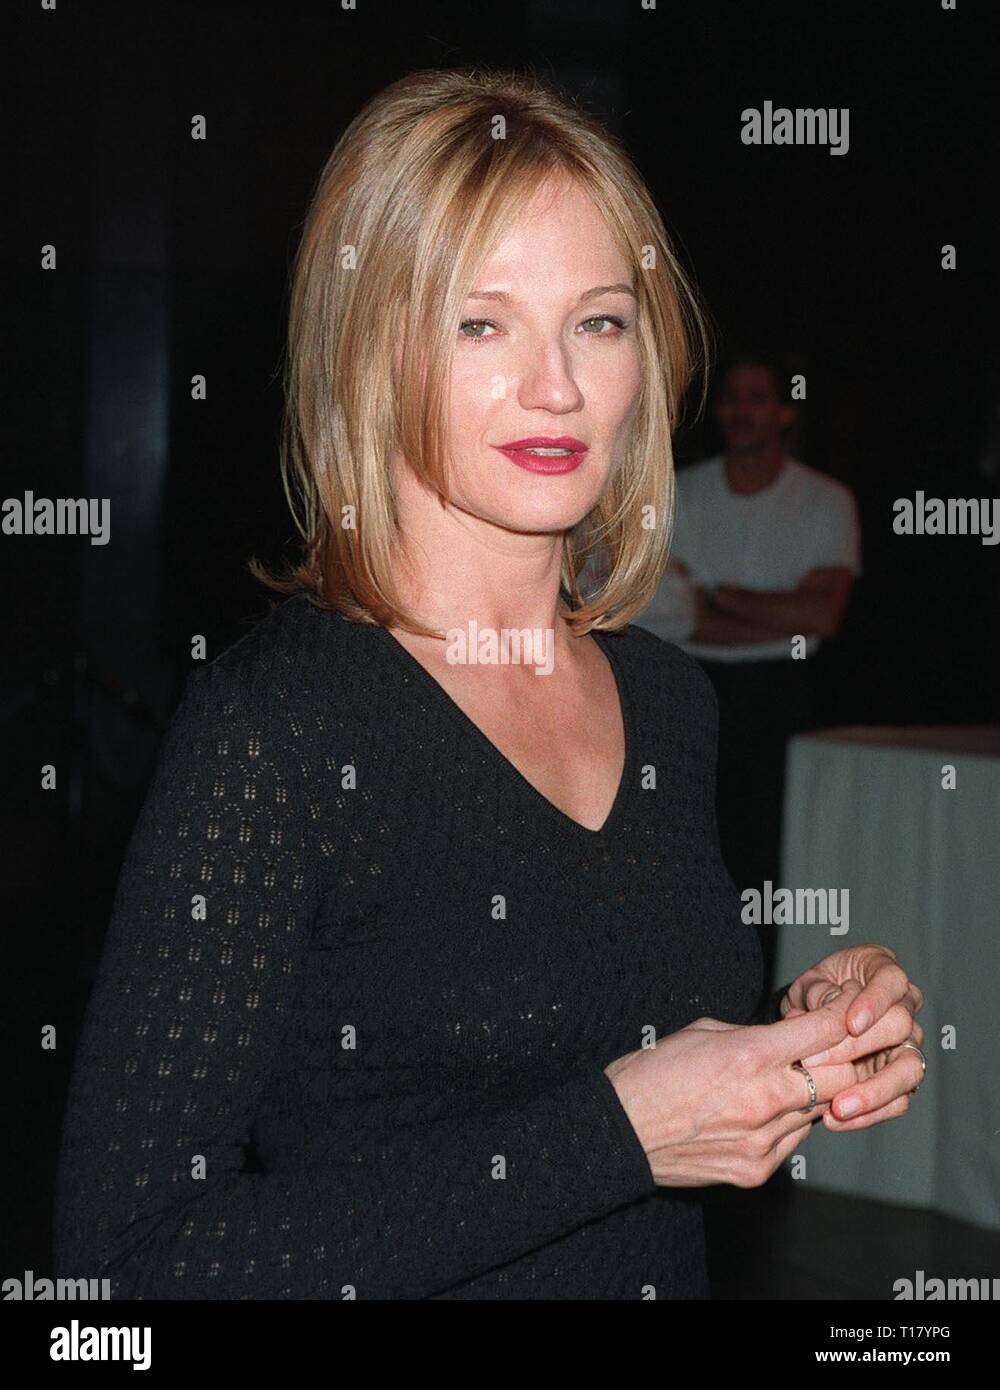 LOS ANGELES, CA. October 20, 1997:  Actress Ellen Barkin at premiere in Los Angeles of her new TV movie 'Before Women Had Wings.' The movie is the first for Oprah Winfrey's Harpo Films production company. Stock Photo